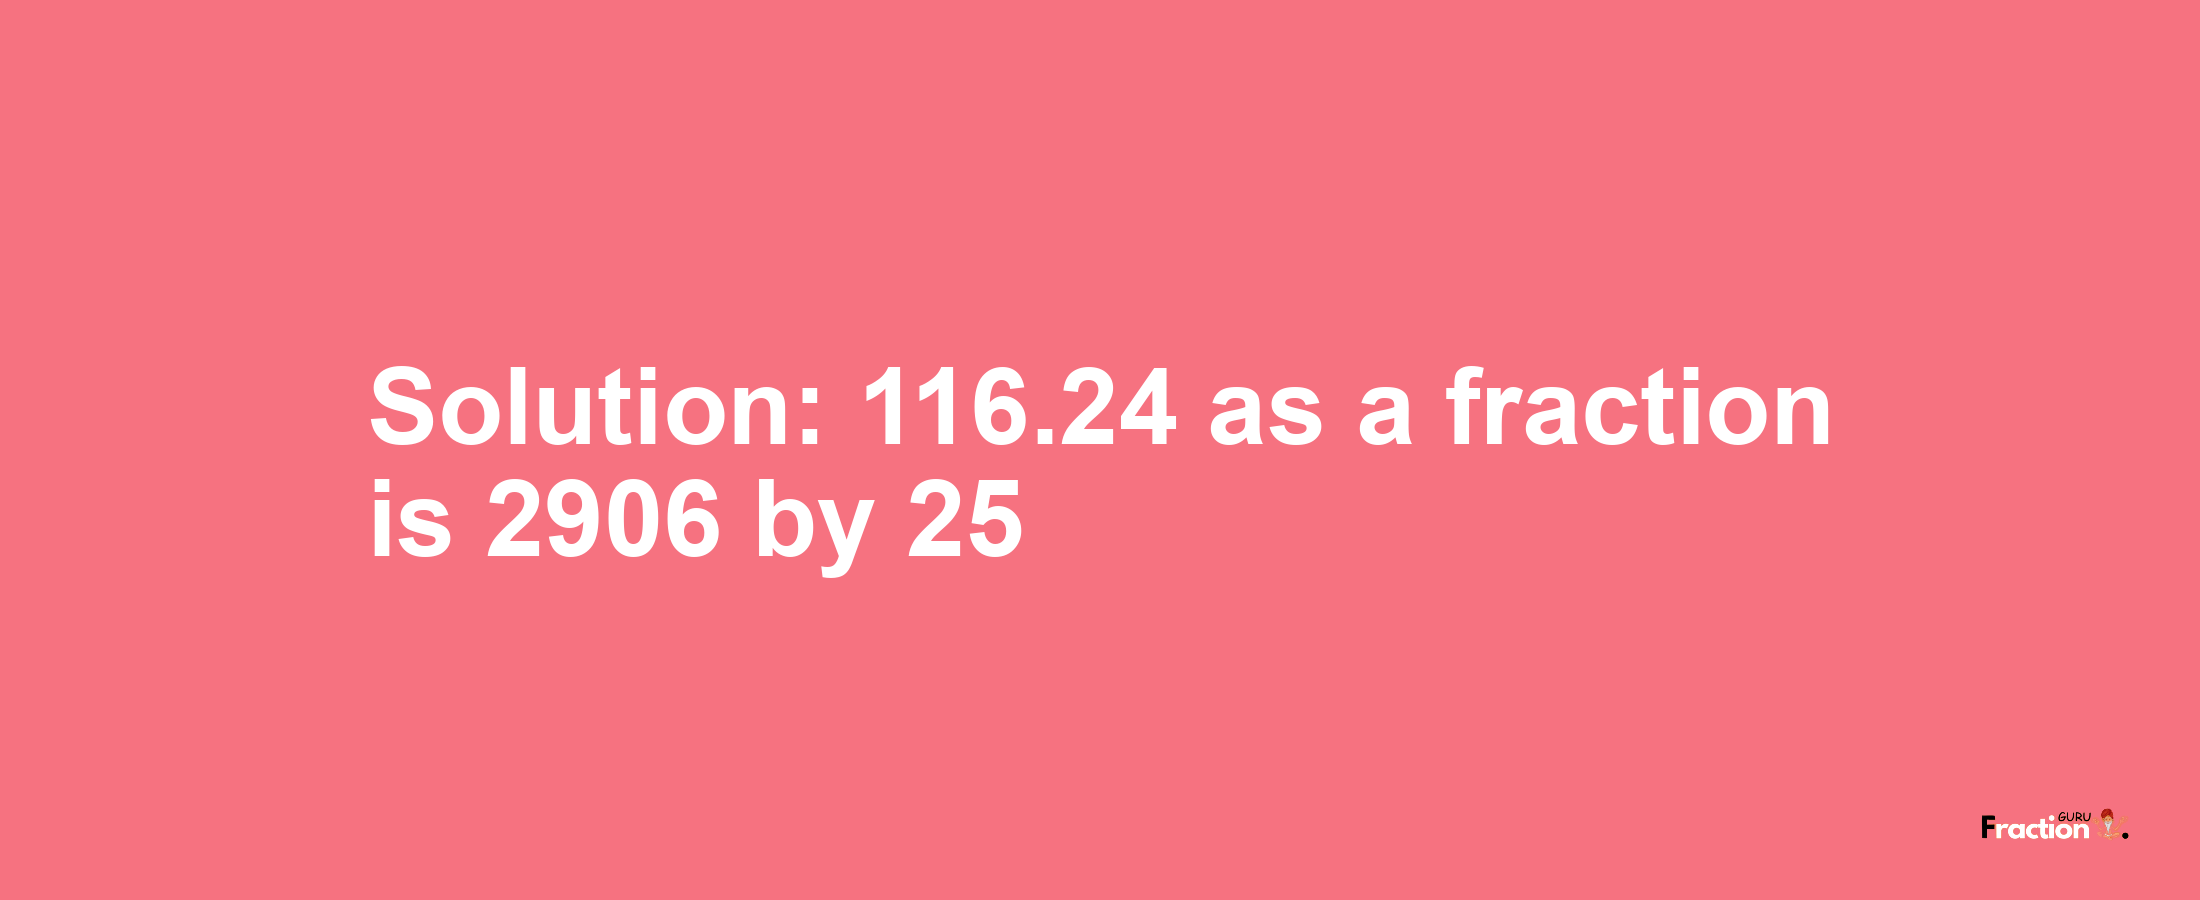 Solution:116.24 as a fraction is 2906/25